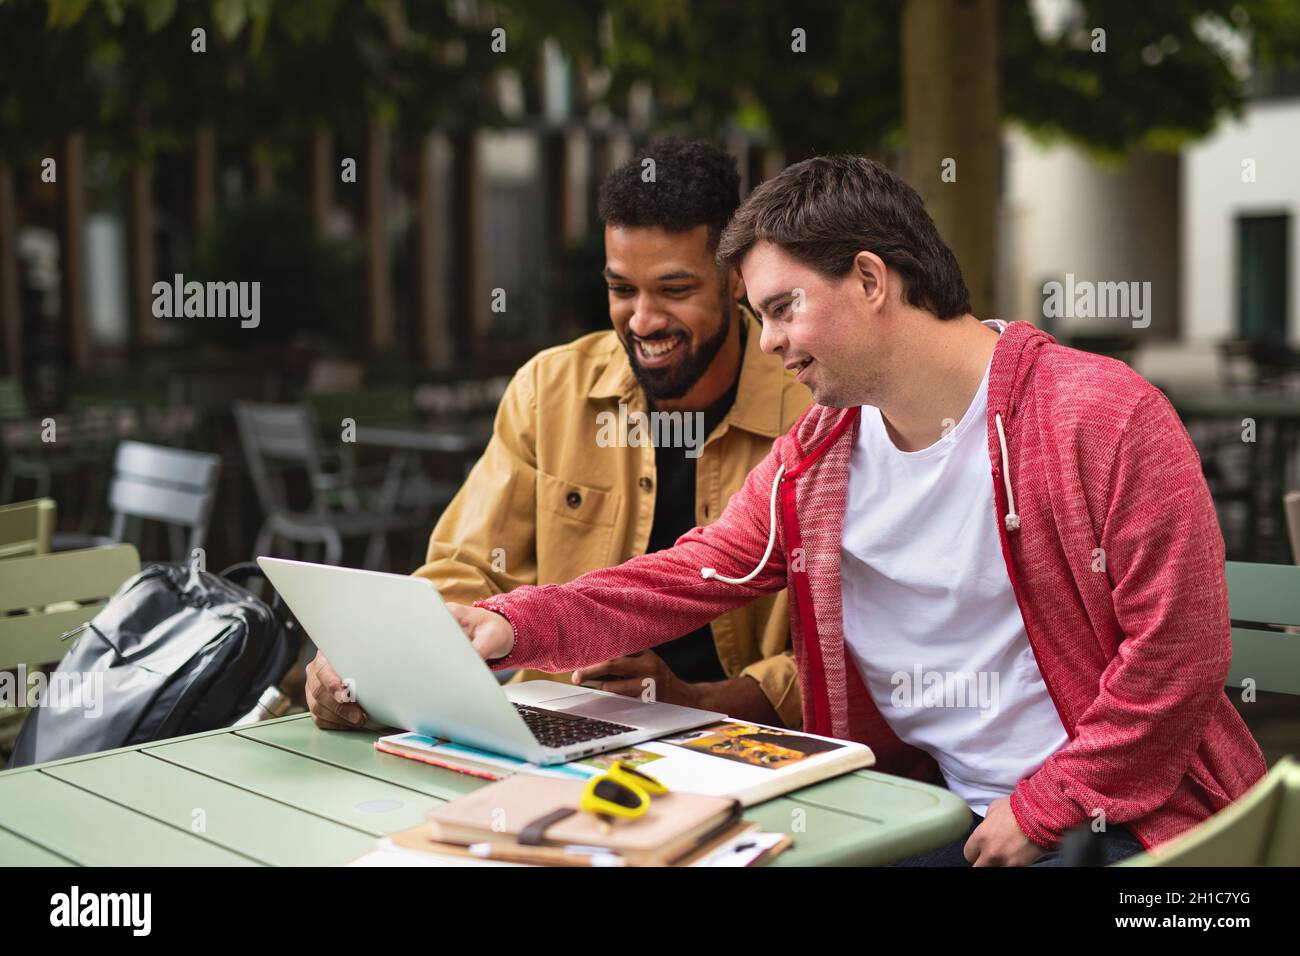 Young man with Down syndrome with his mentoring friend sitting outdoors in cafe using laptop. Stock Photo